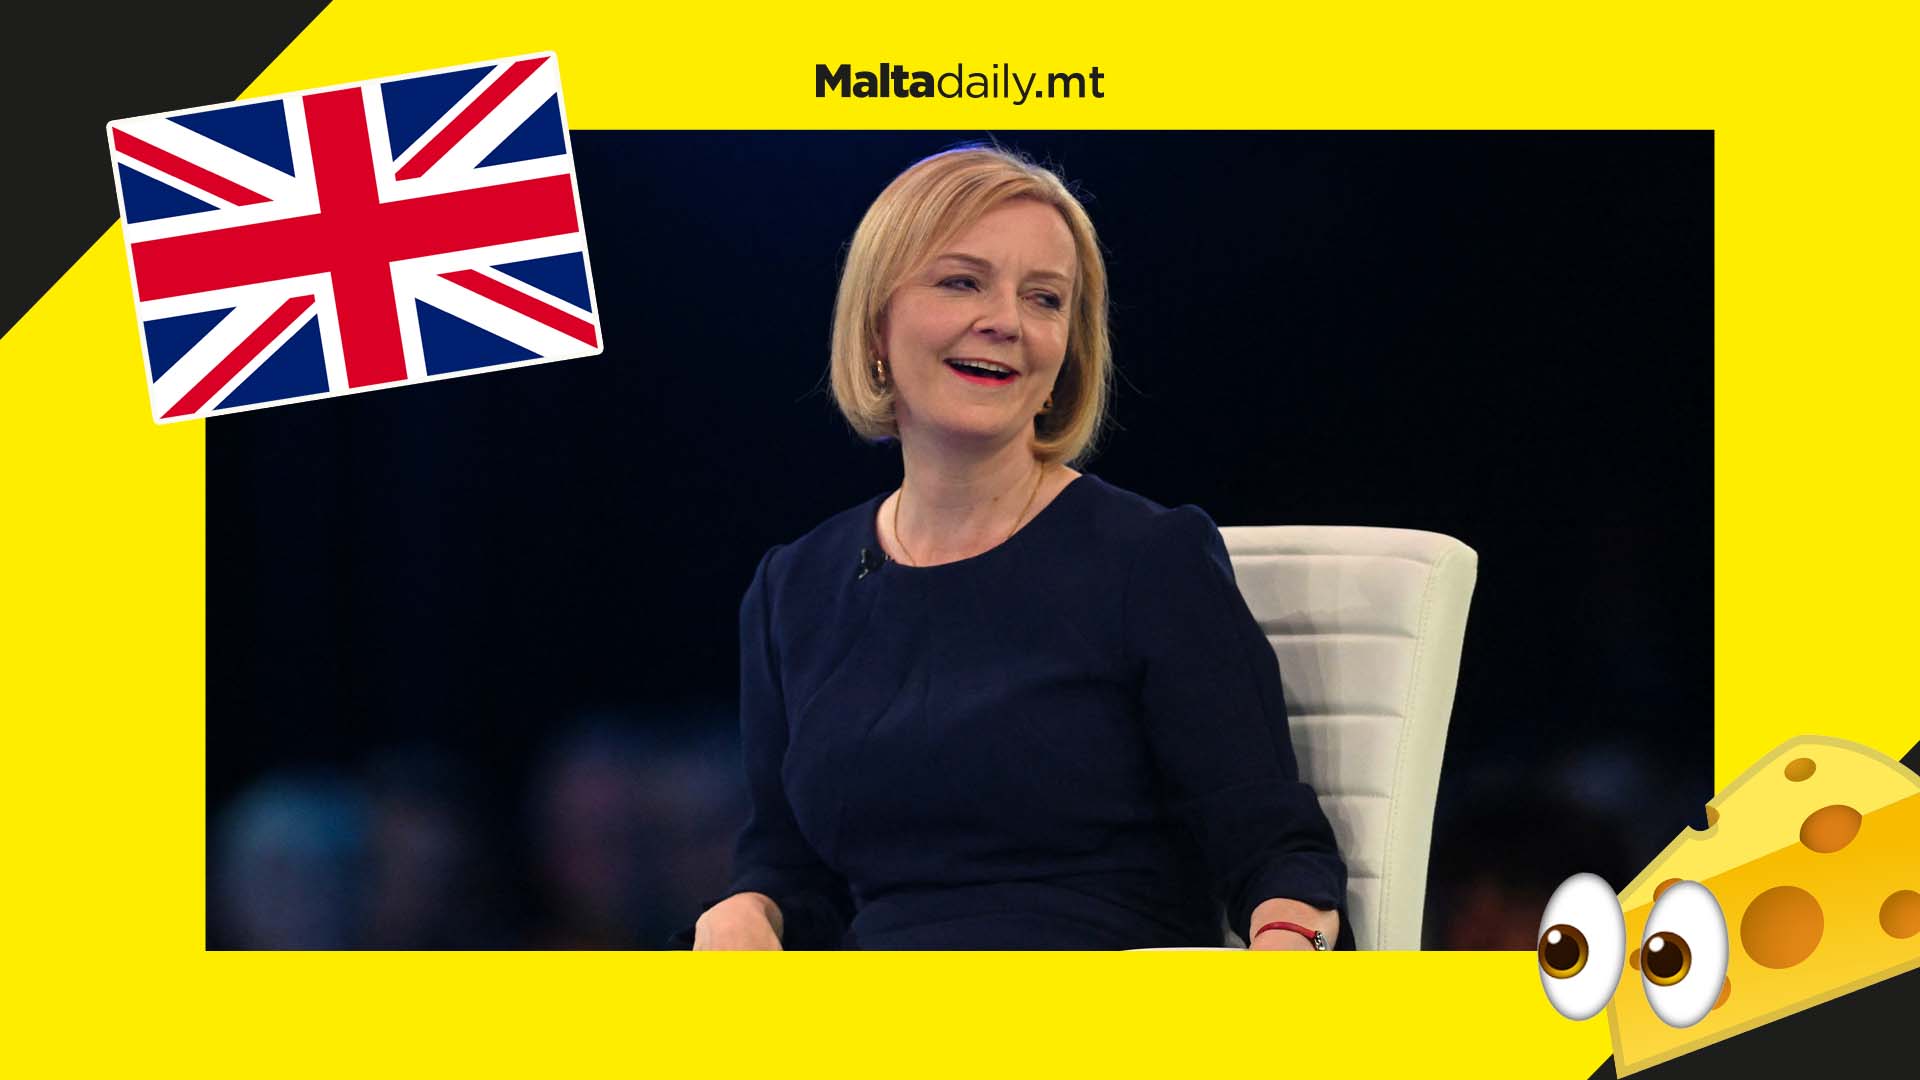 7 fun facts about UK’s new prime Minister Liz Truss